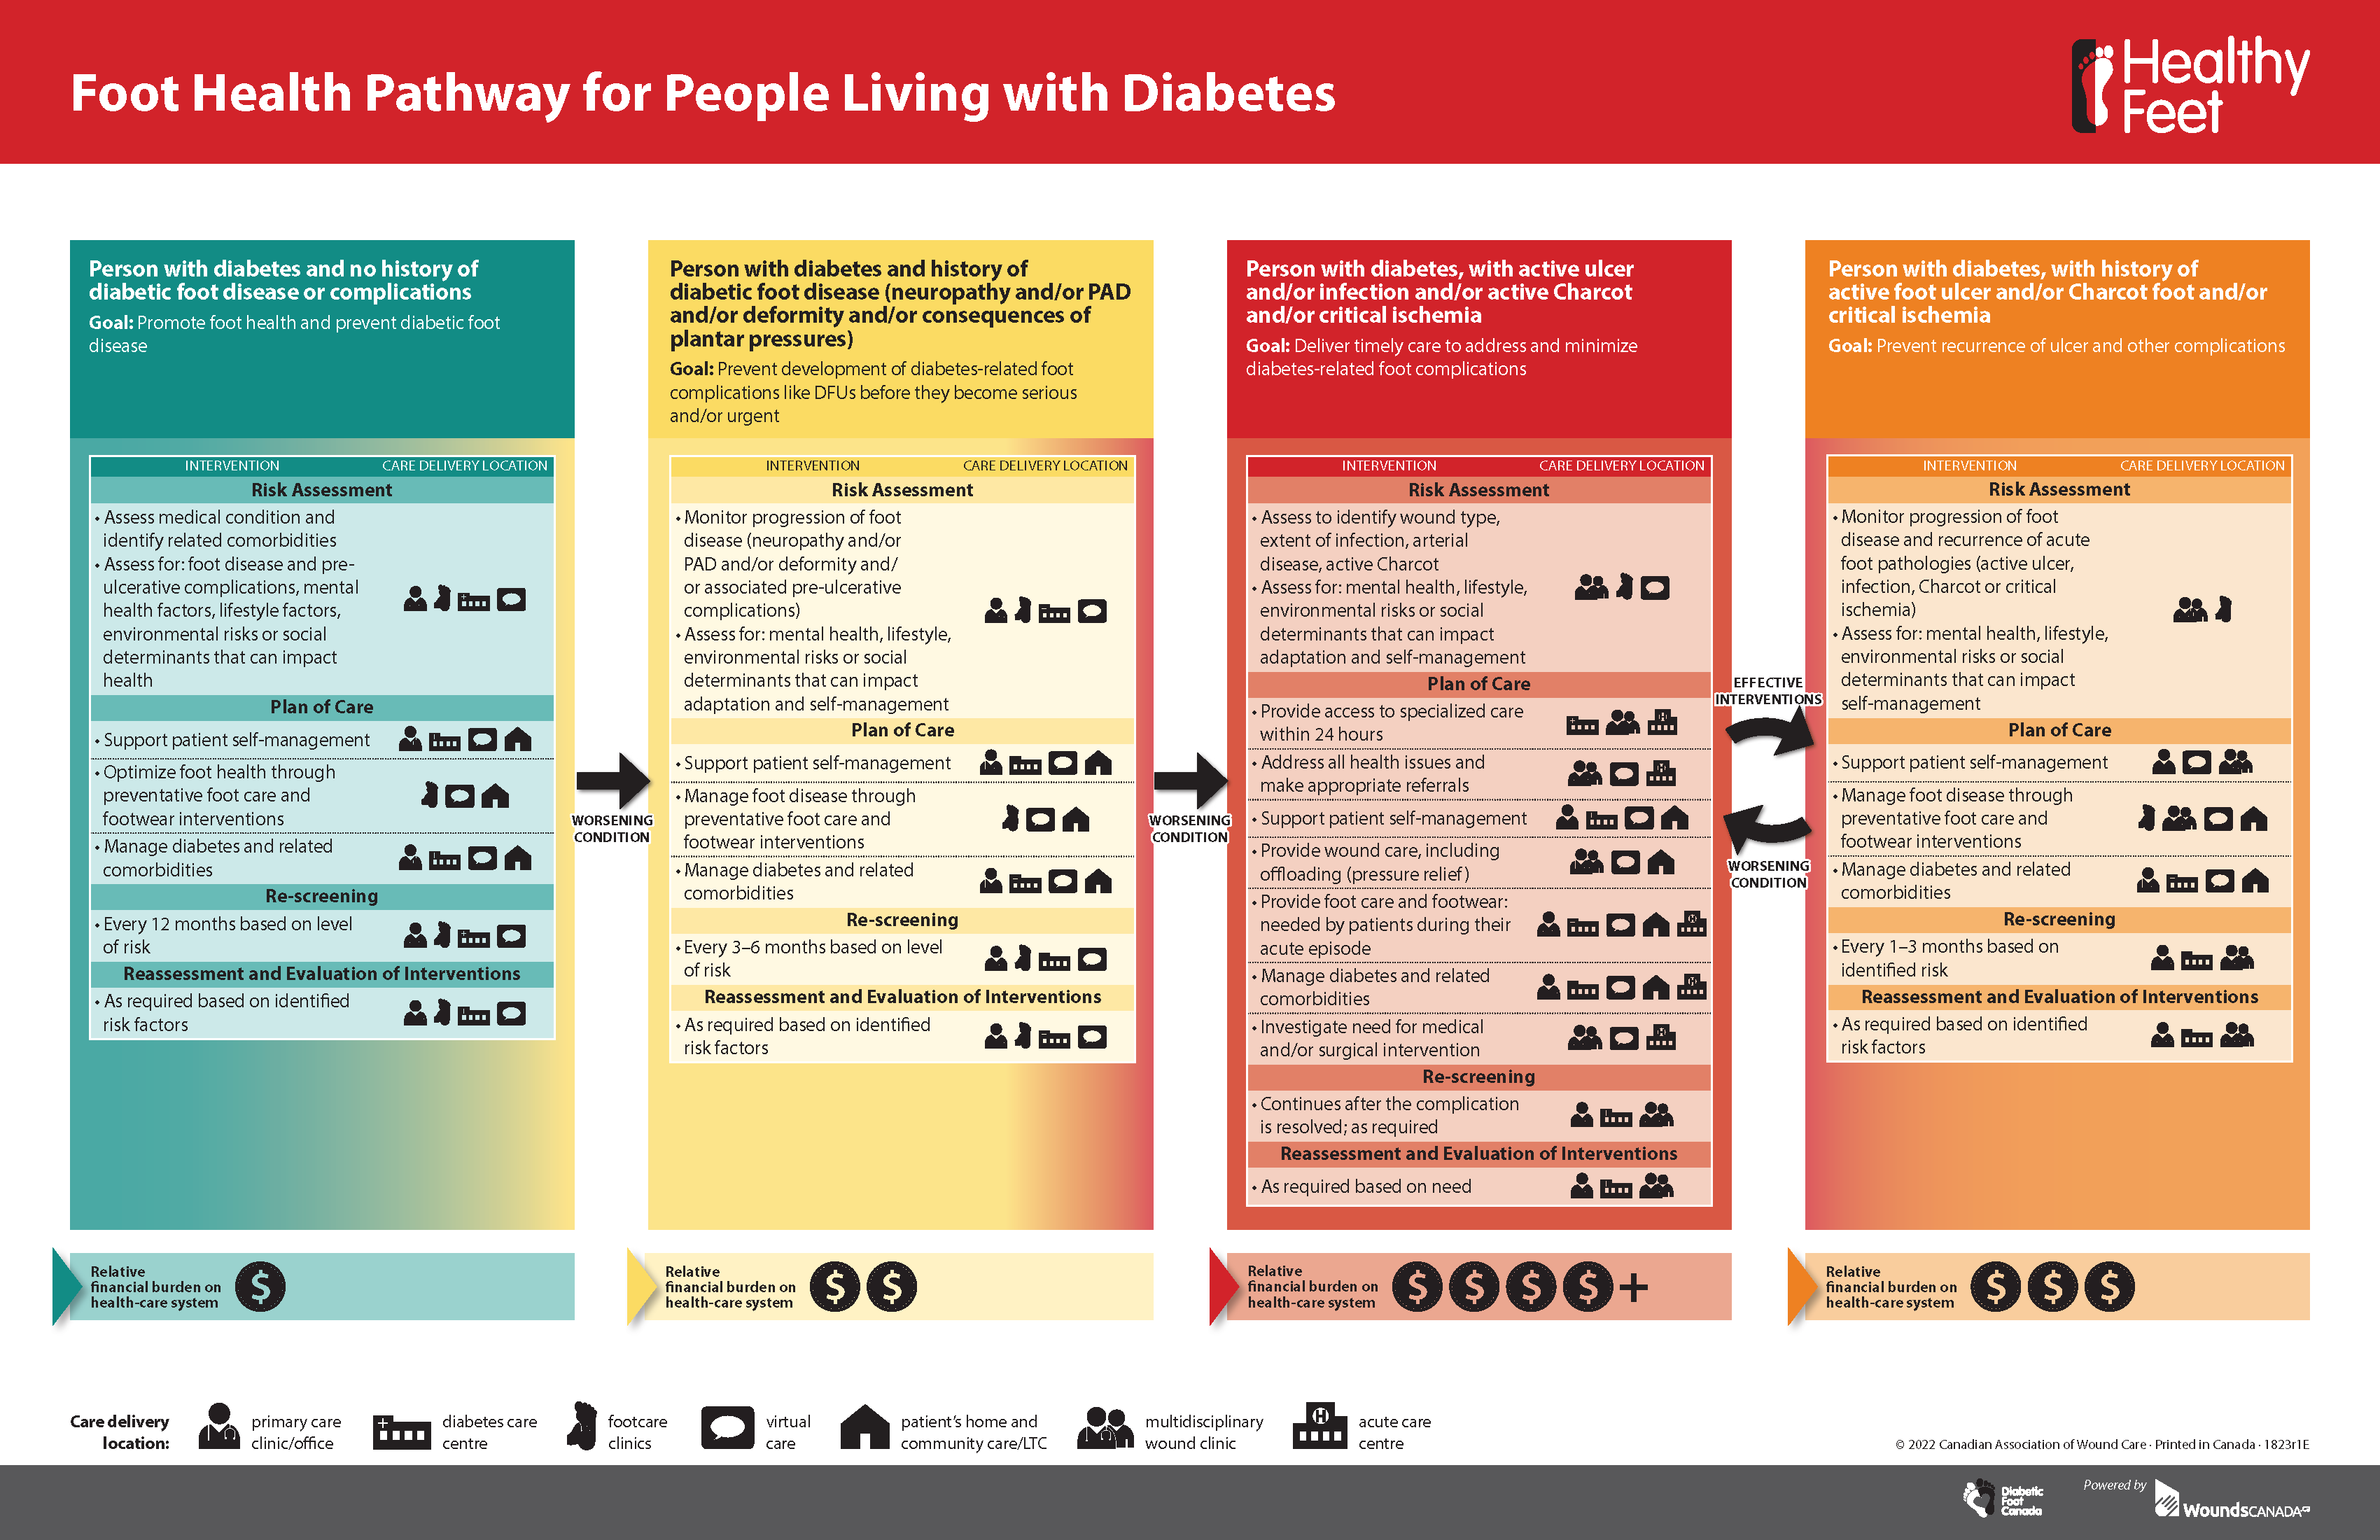 Foot Health Pathway for People Living with Diabetes (1 page)